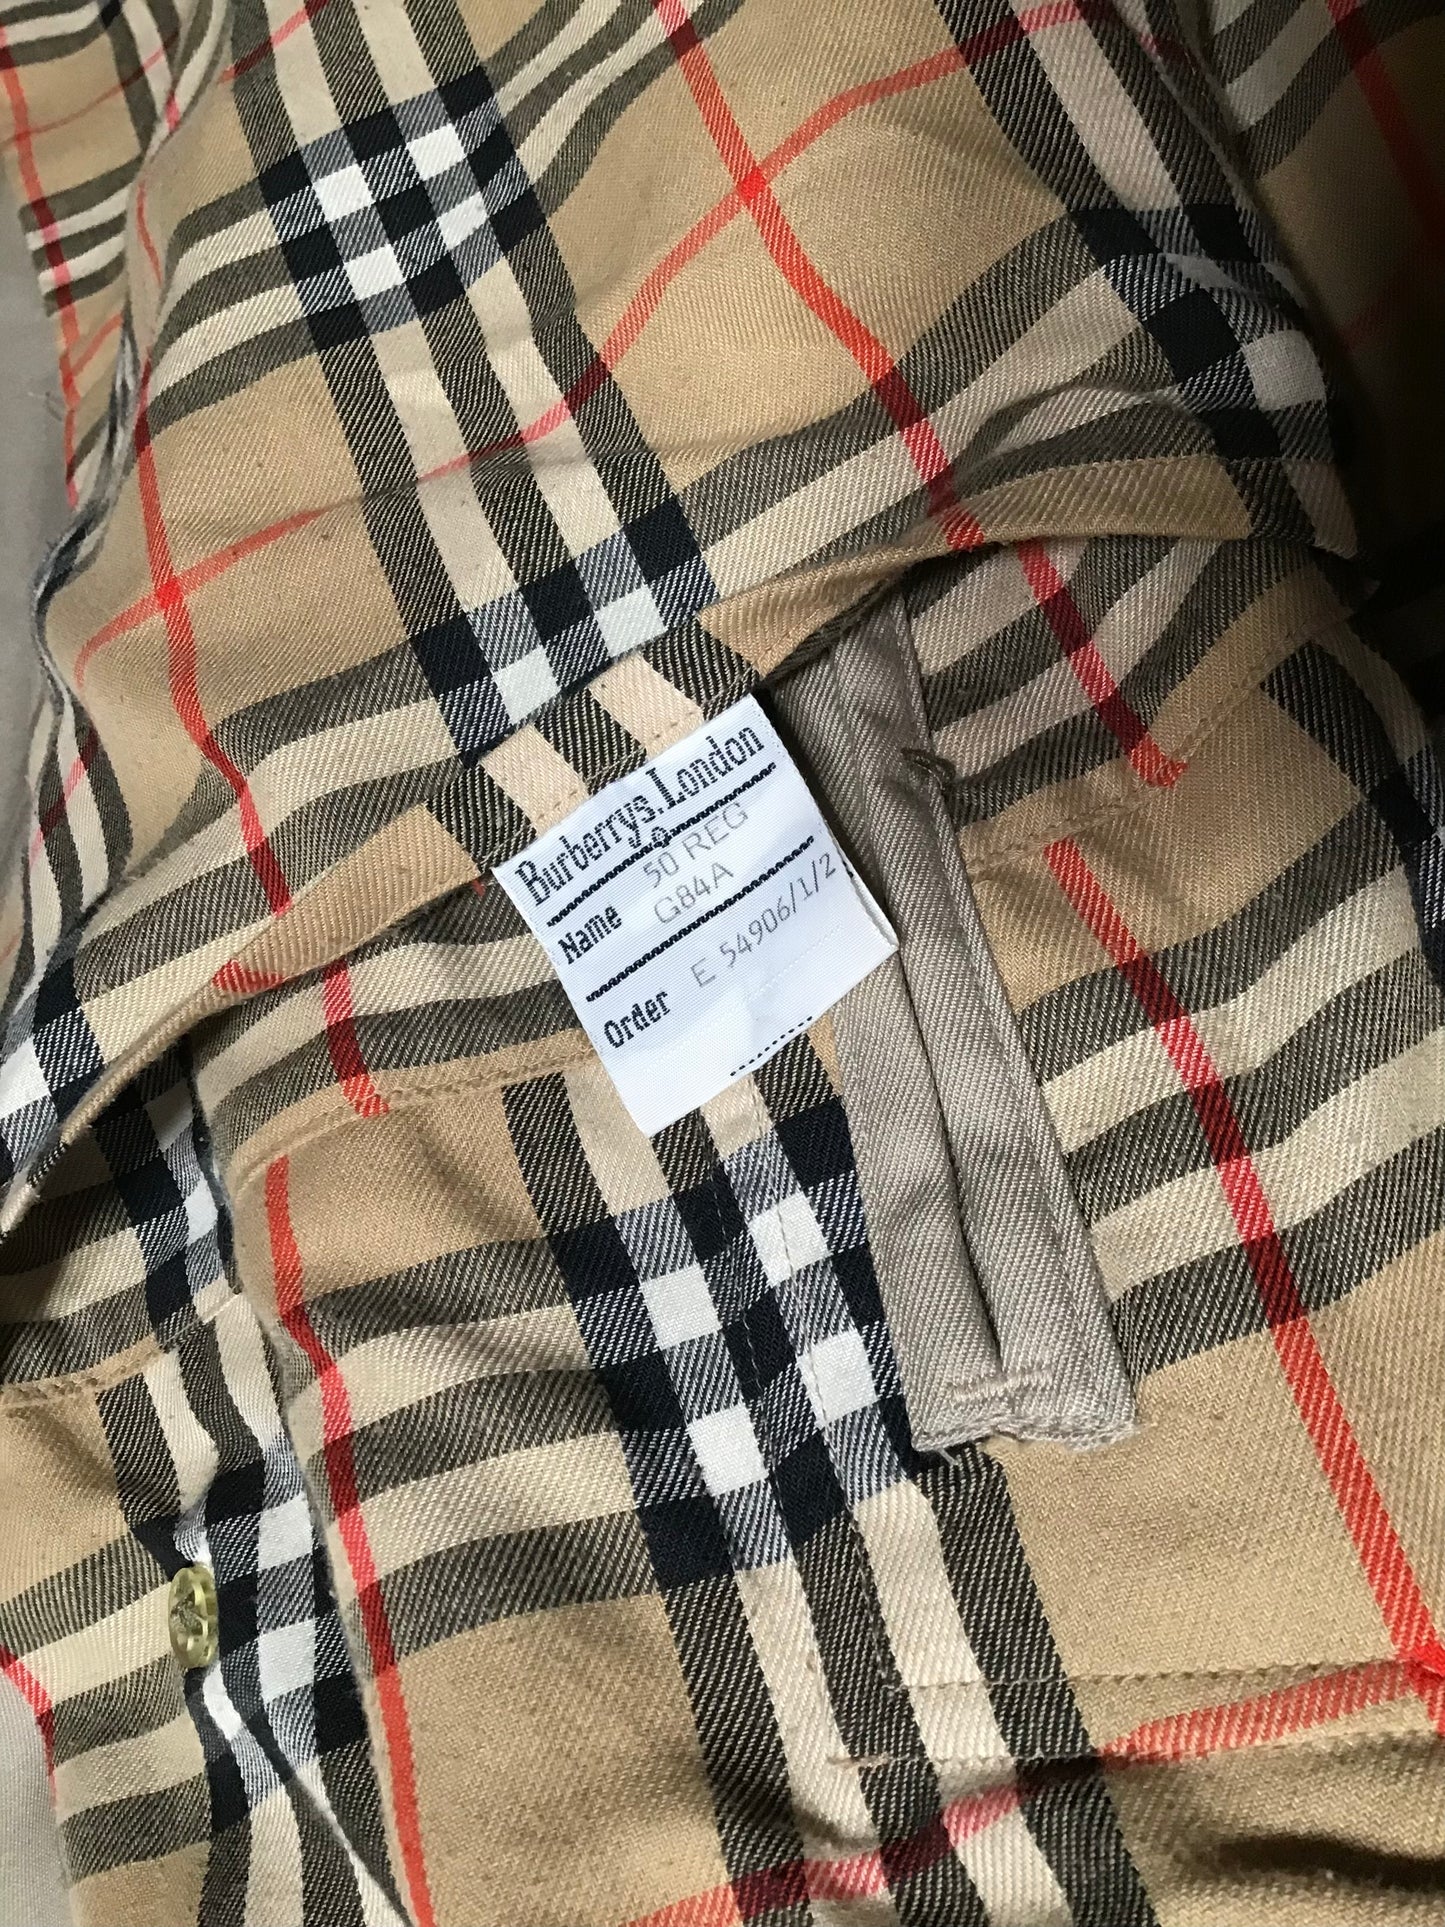 Burberry Trench Coat (Size XL)